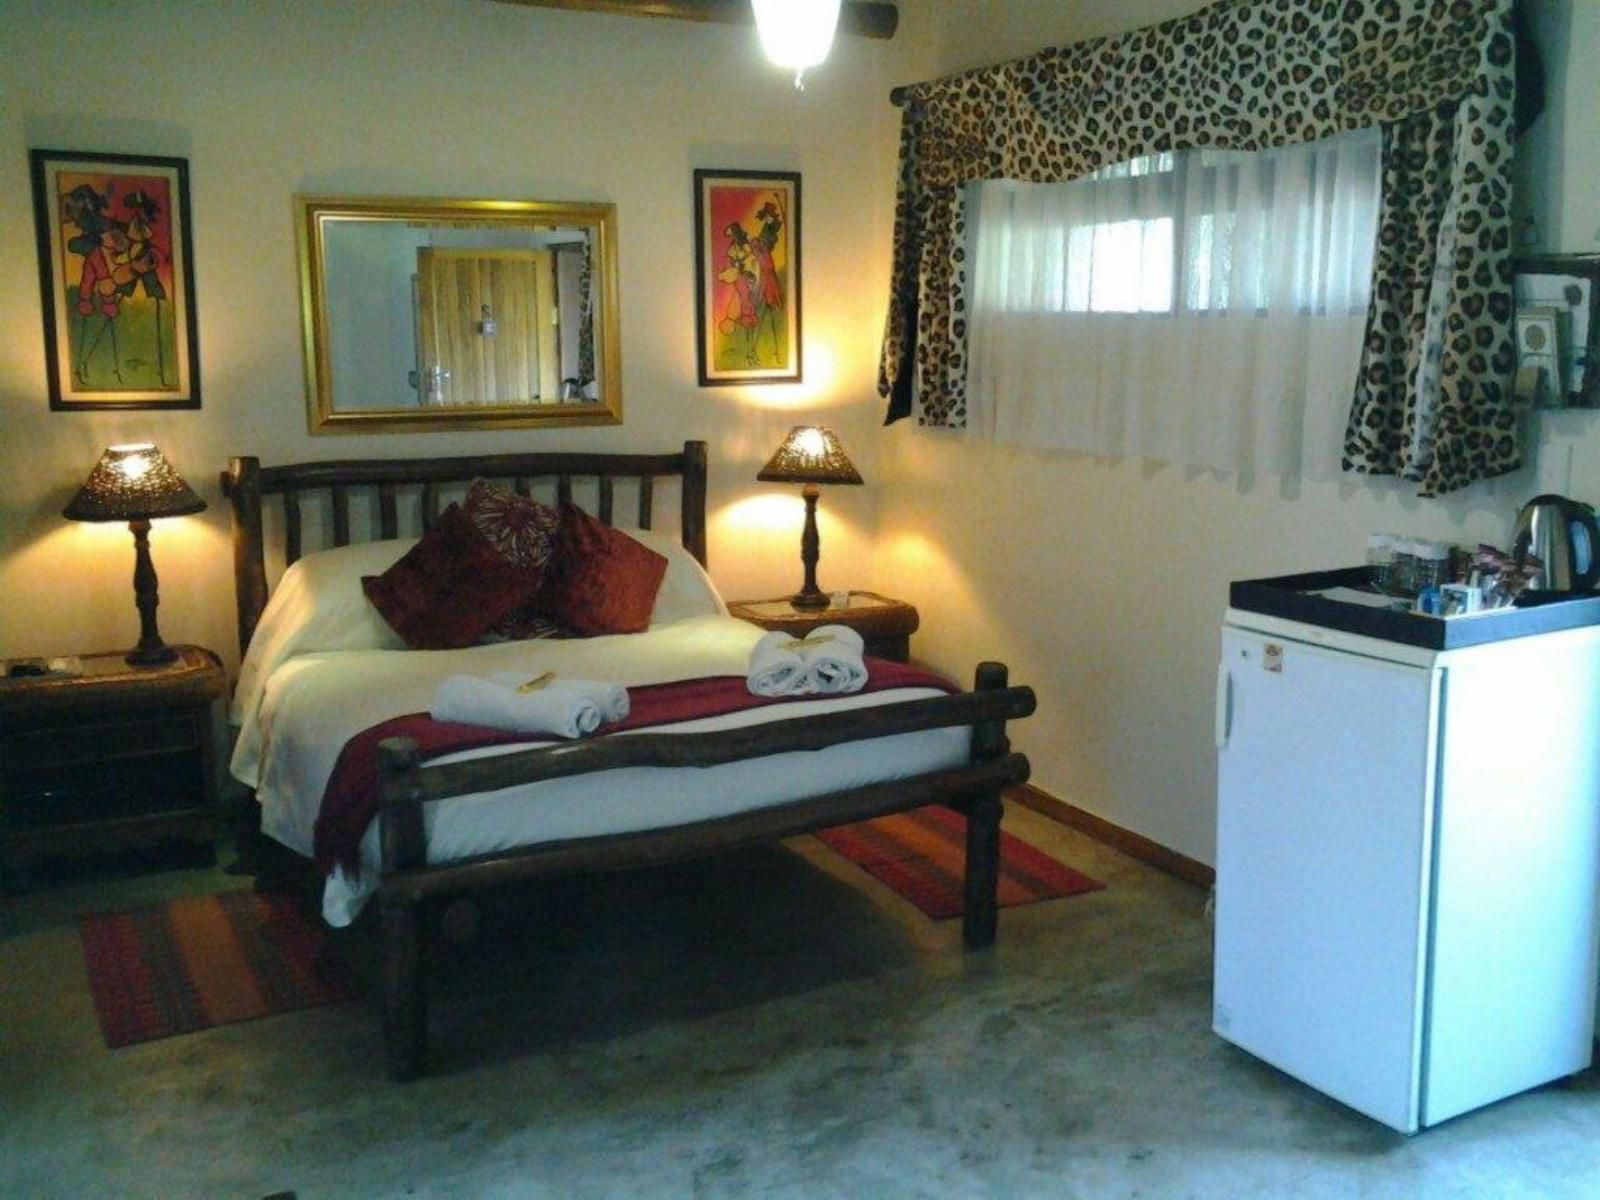 Roosfontein Bed And Breakfast And Conference Room Queensburgh Durban Kwazulu Natal South Africa 